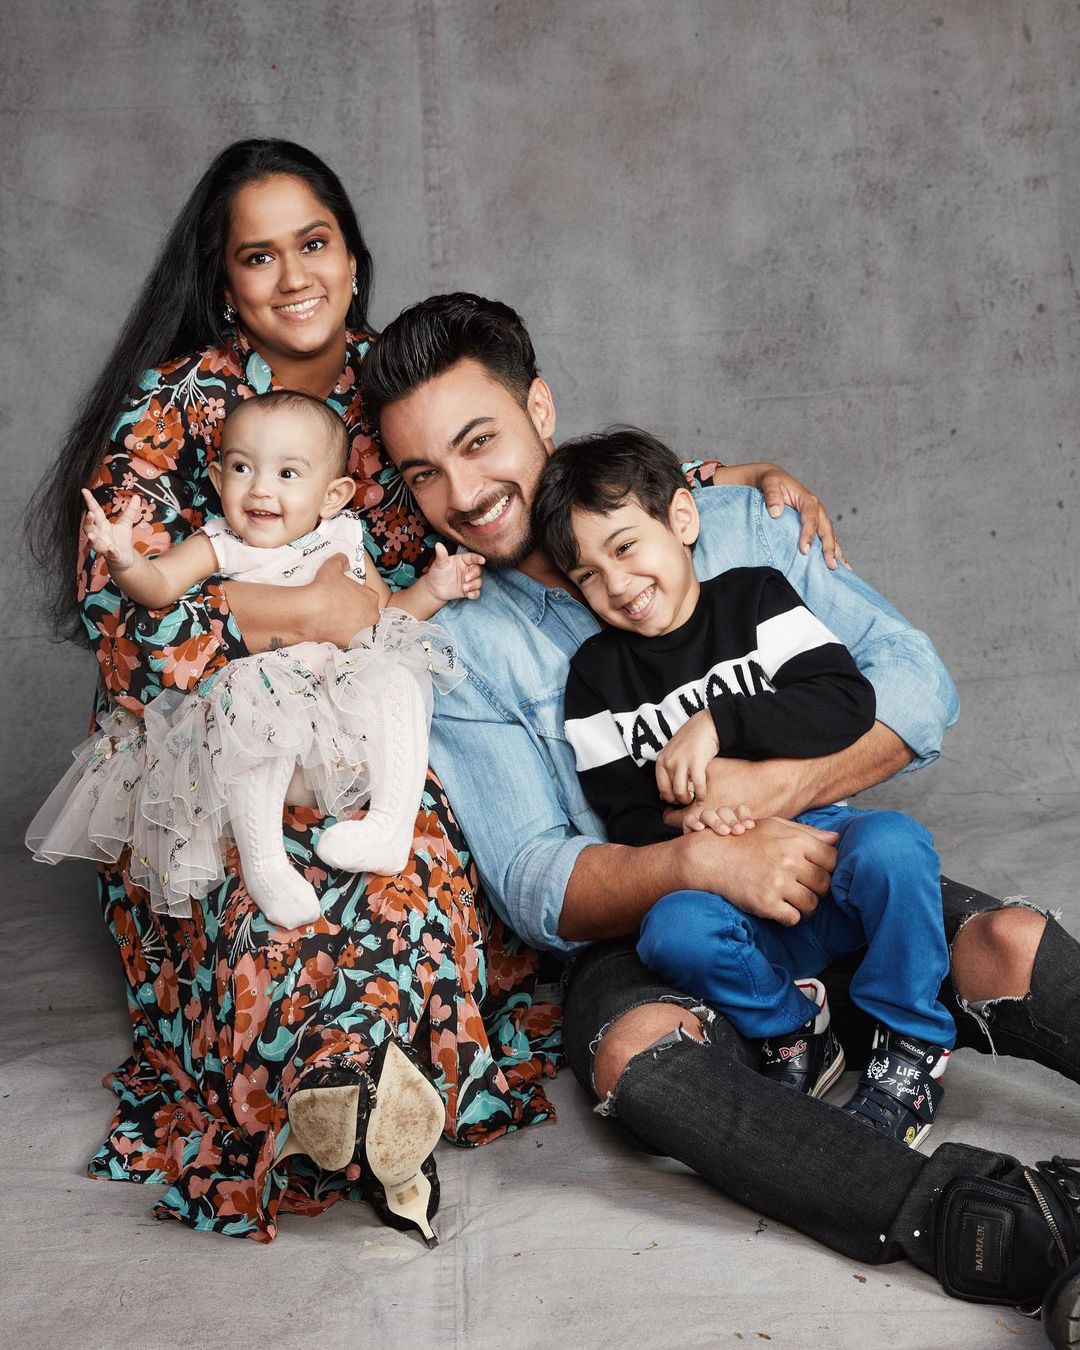 After the birth of their son Ahil in 2016, Arpita and Aayush welcomed their daughter Ayat on December 27, 2019, on 'mamu' Salman Khan's birthday. (Image: Instagram)